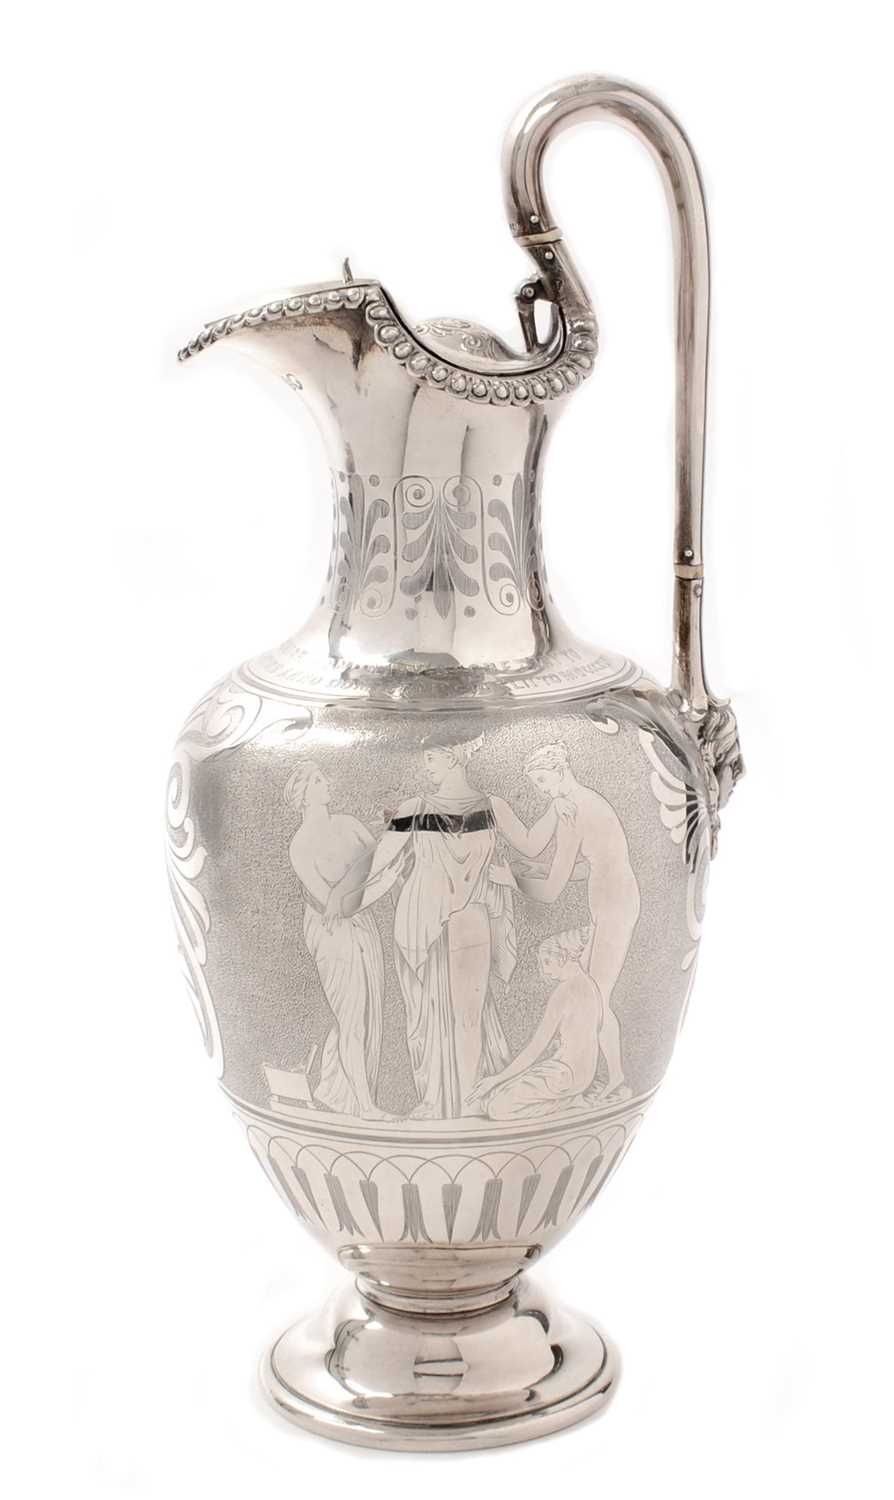 Lot 178 - Victorian silver Classical Revival ewer.